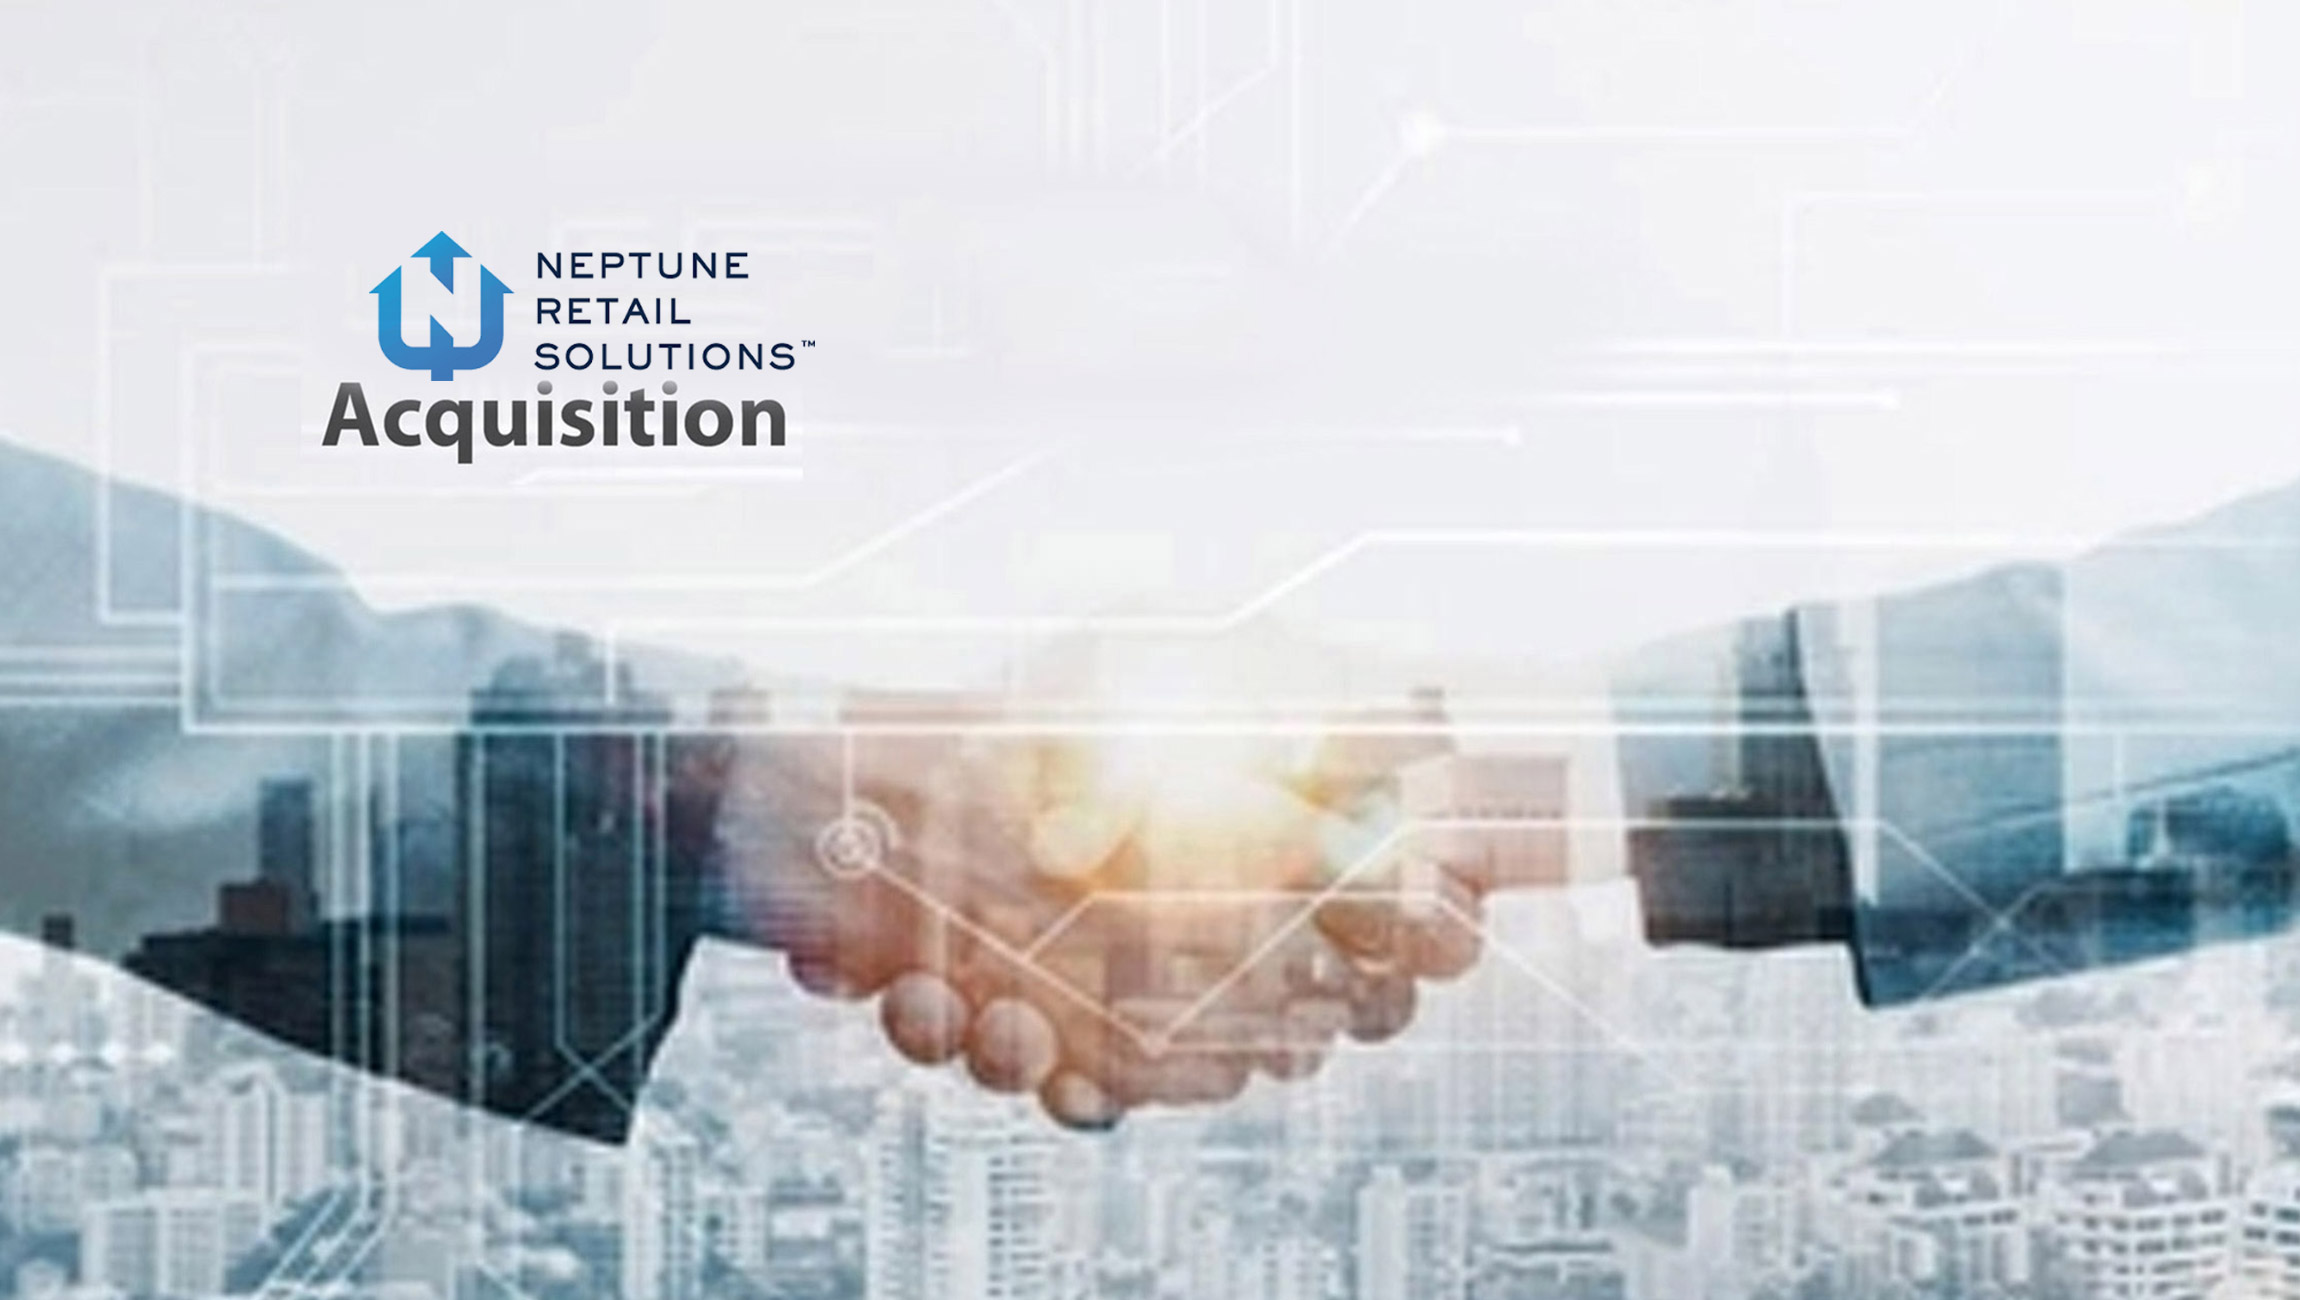 Neptune-Retail-Solutions-Doubles-Down-On-In-Store-Innovation_-AI-and-First-Party-Data-With-Acquisition-Of-RevTrax